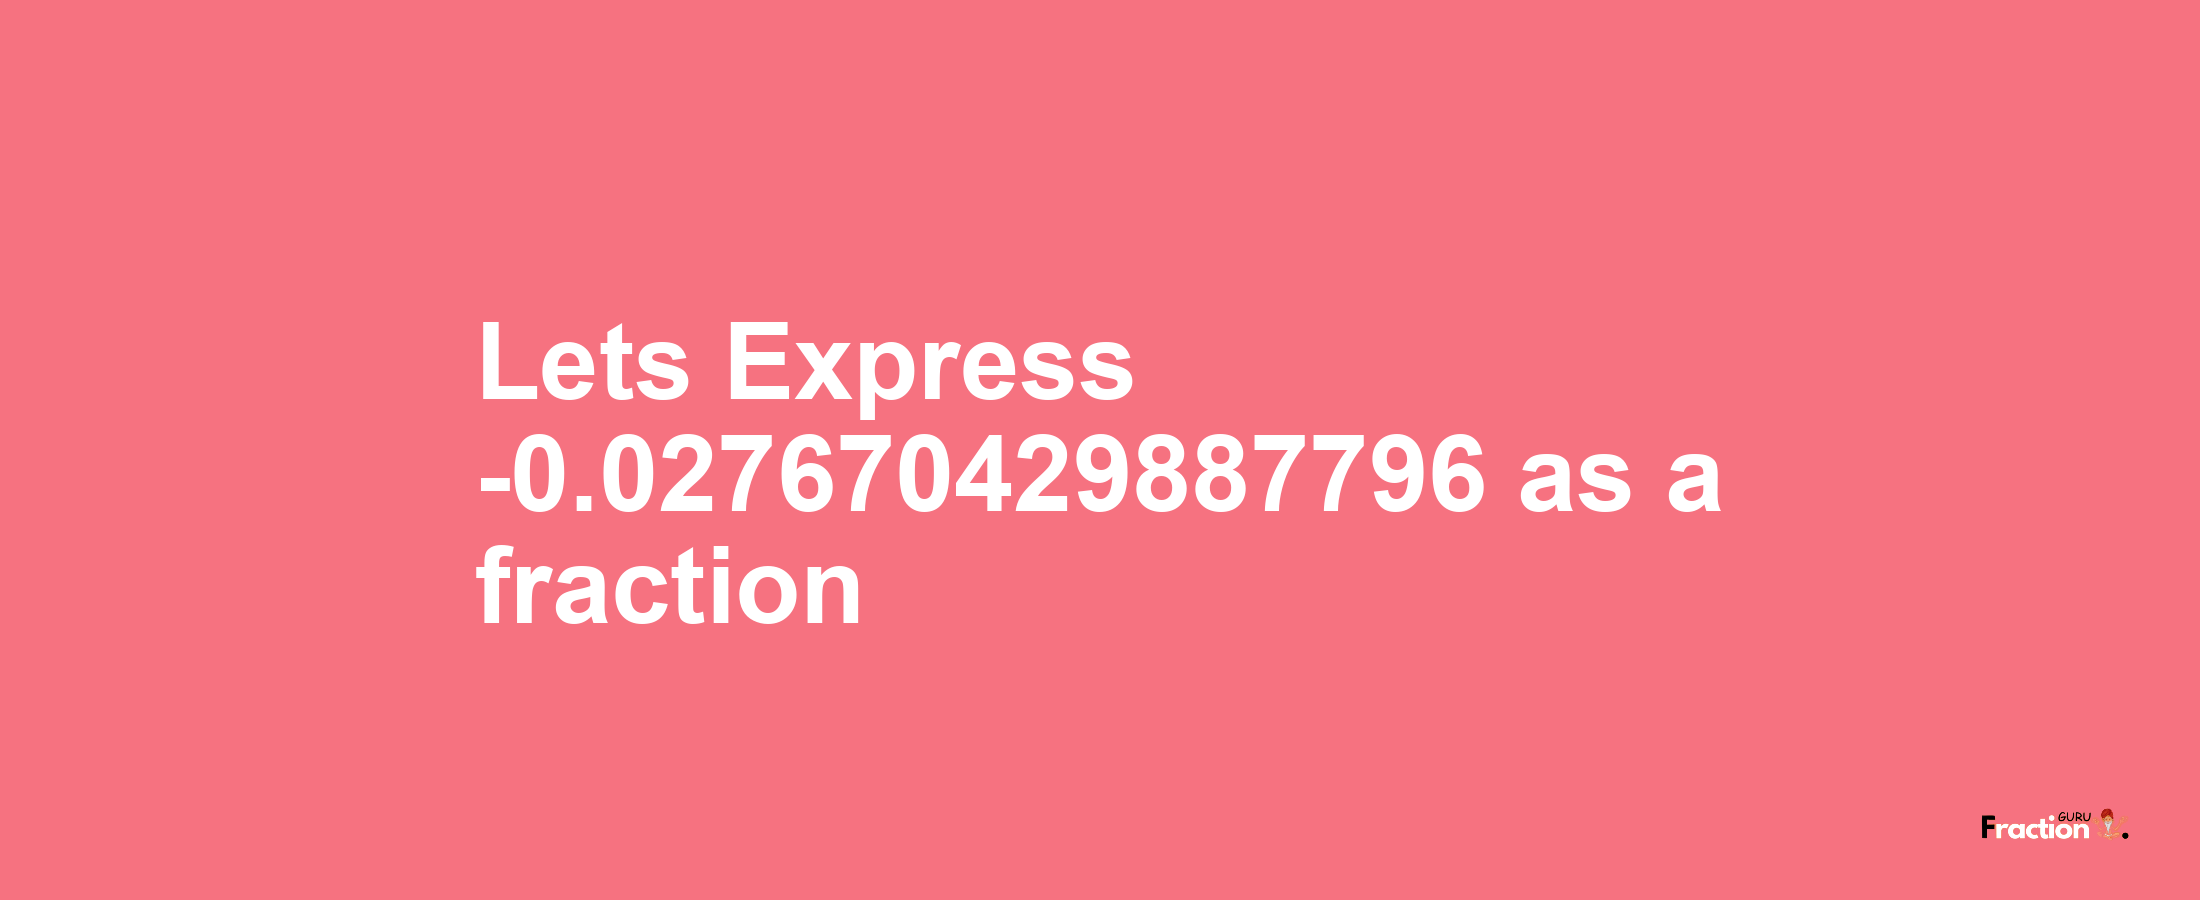 Lets Express -0.027670429887796 as afraction